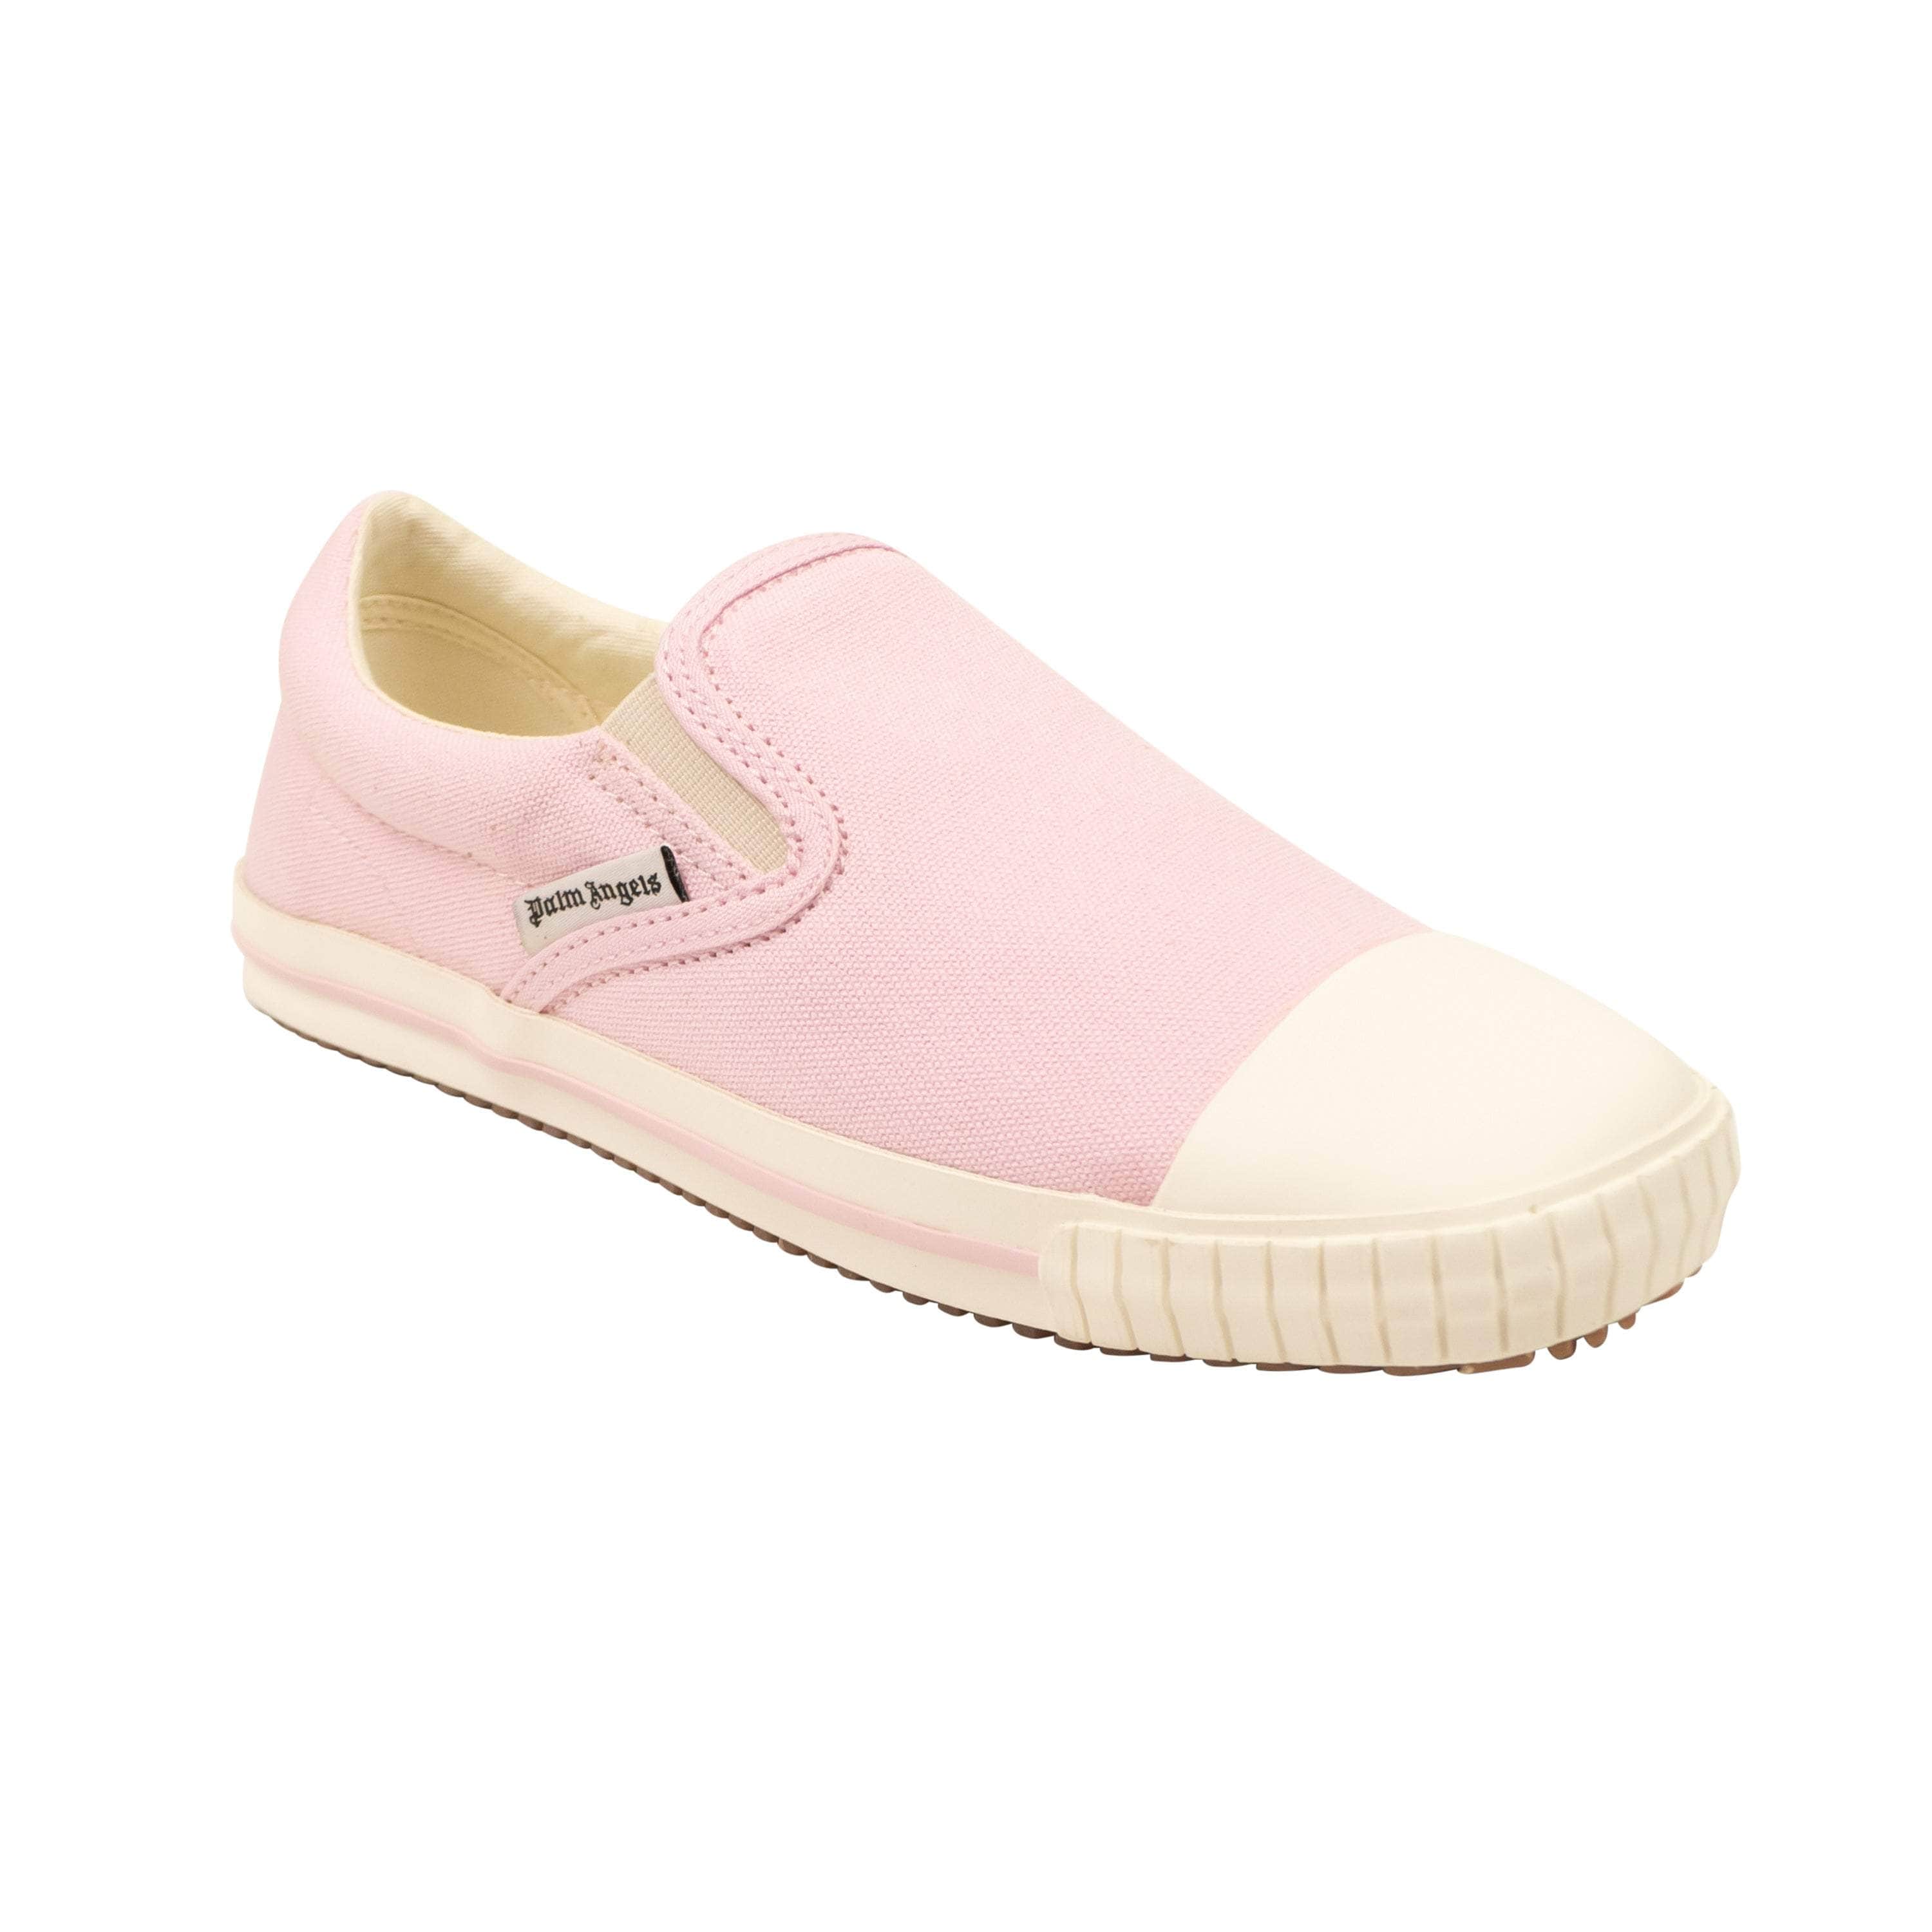 Palm Angels channelenable-all, chicmi, couponcollection, gender-womens, main-shoes, palm-angels, size-36, size-37, size-39, under-250 Pink Vulcanized Square Slip On Canvas Sneakers